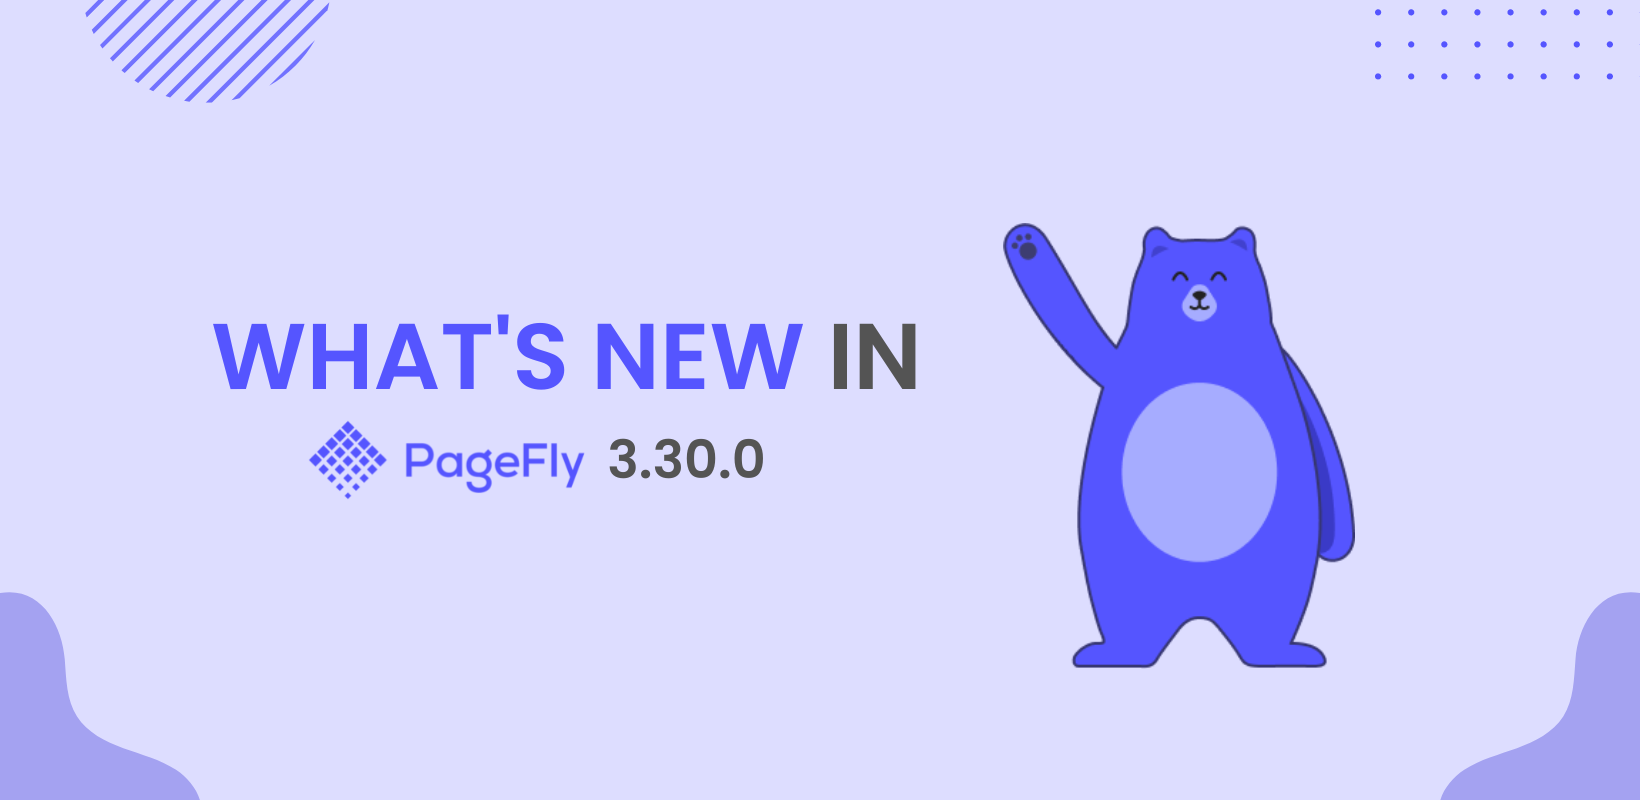 PageFly 3.30.0: New In App Update, Minta Automated Video, Enorm Image Gallery + Video Integration